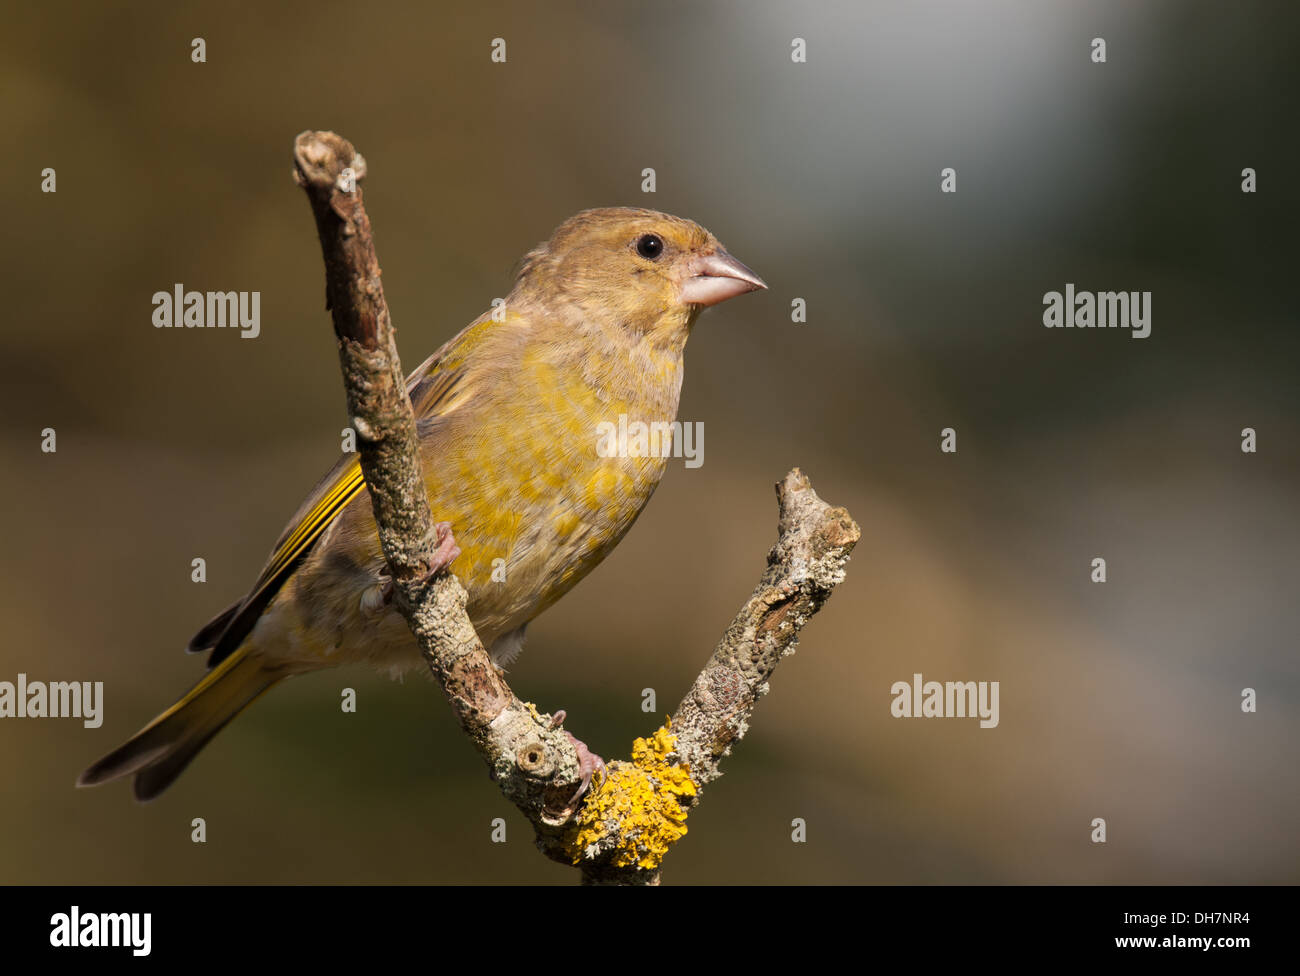 Greenfinch on a natural perch Stock Photo